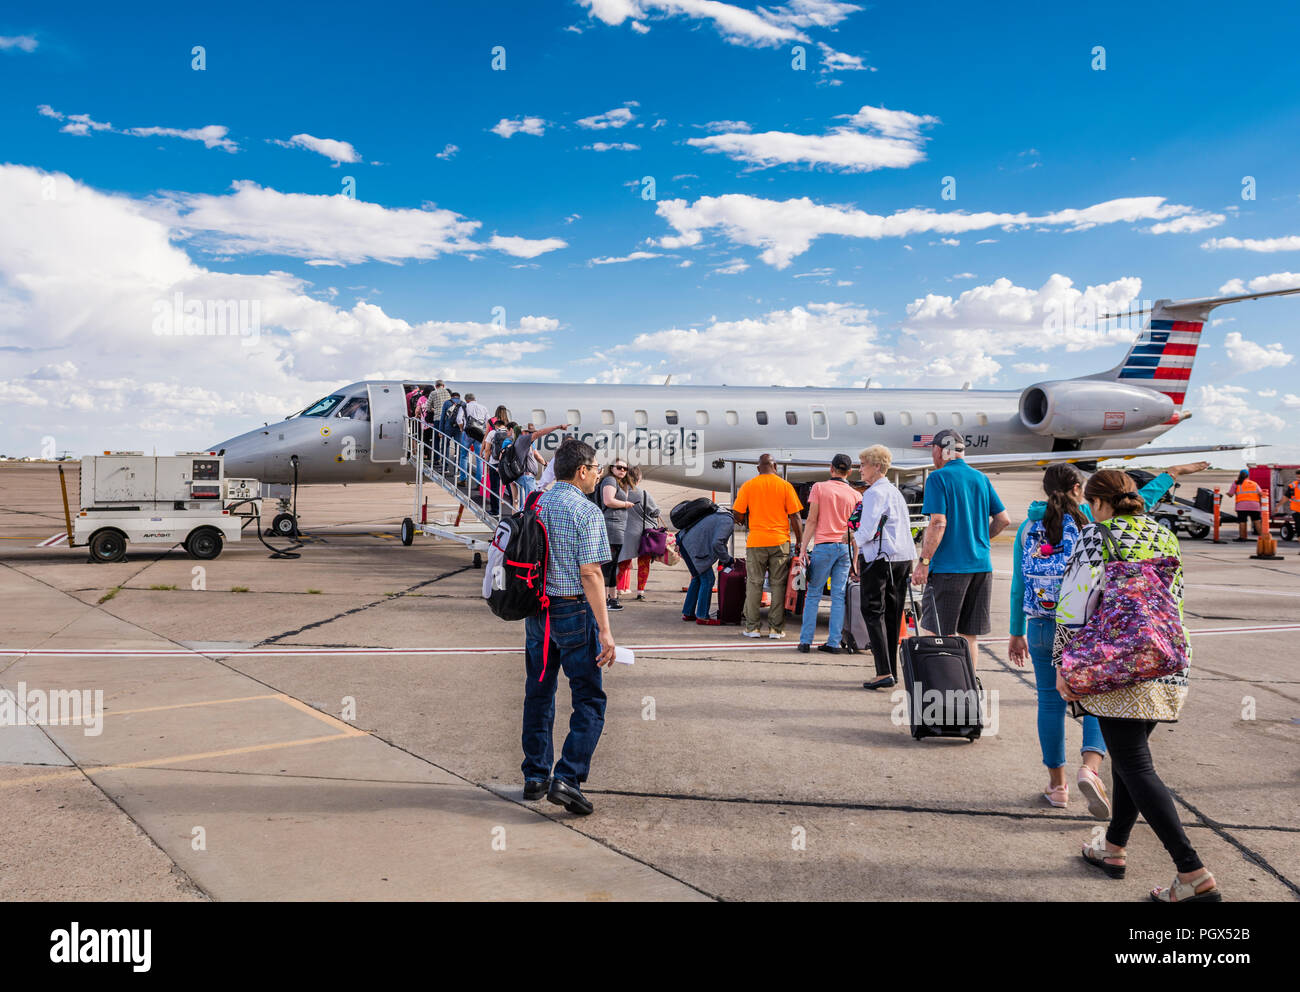 Passagiere ein American Airlines, American Eagle Embraer 140 Flugzeuge aus dem Asphalt mit airstairs am Flughafen in Roswell, New Mexico USA. Stockfoto